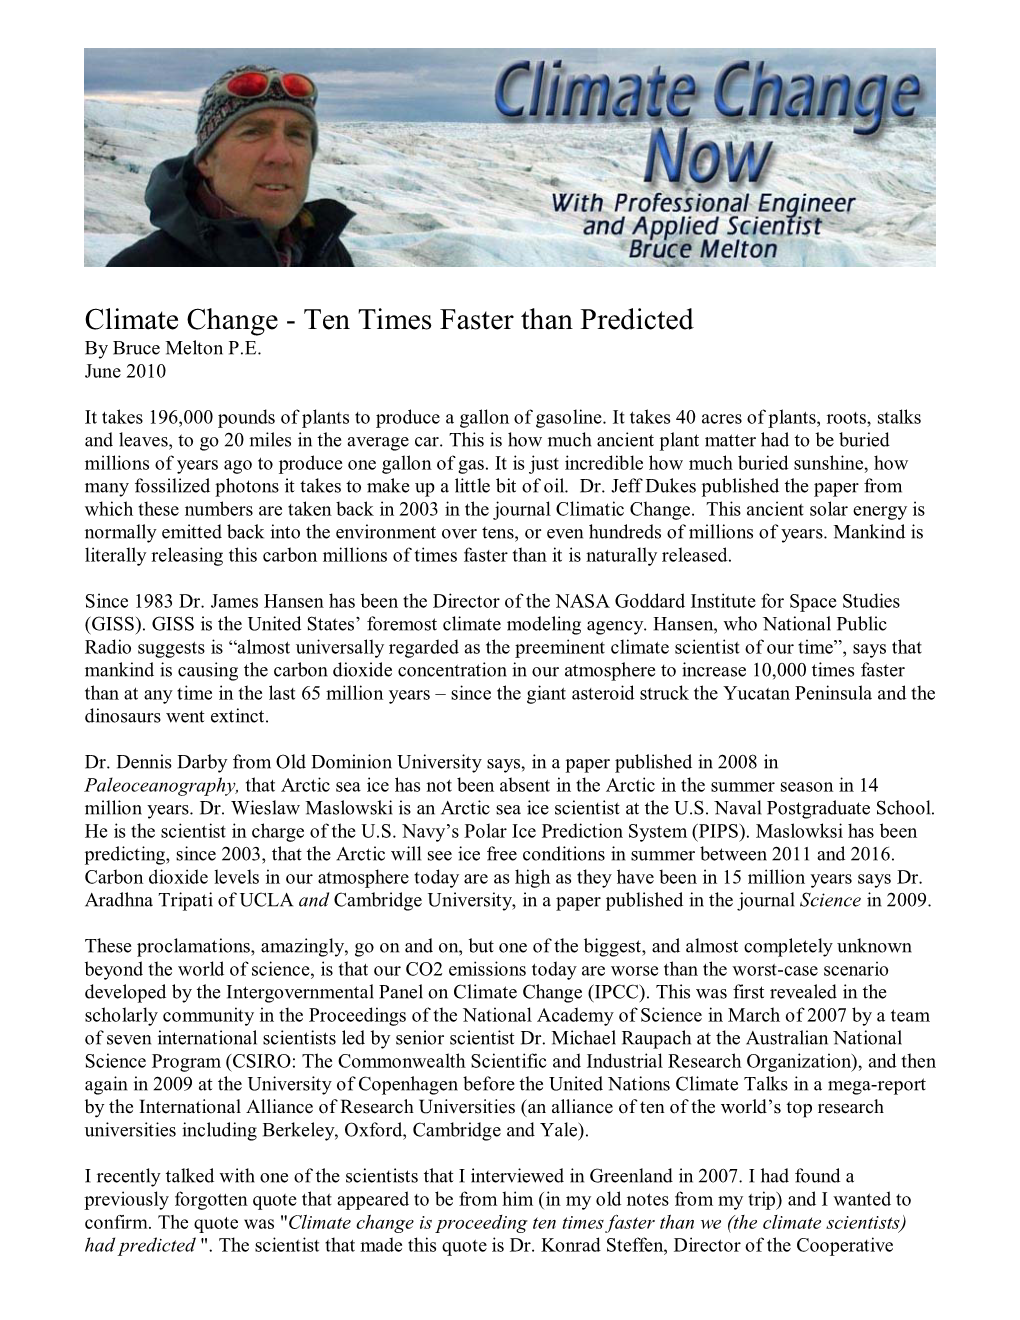 Climate Change - Ten Times Faster Than Predicted by Bruce Melton P.E